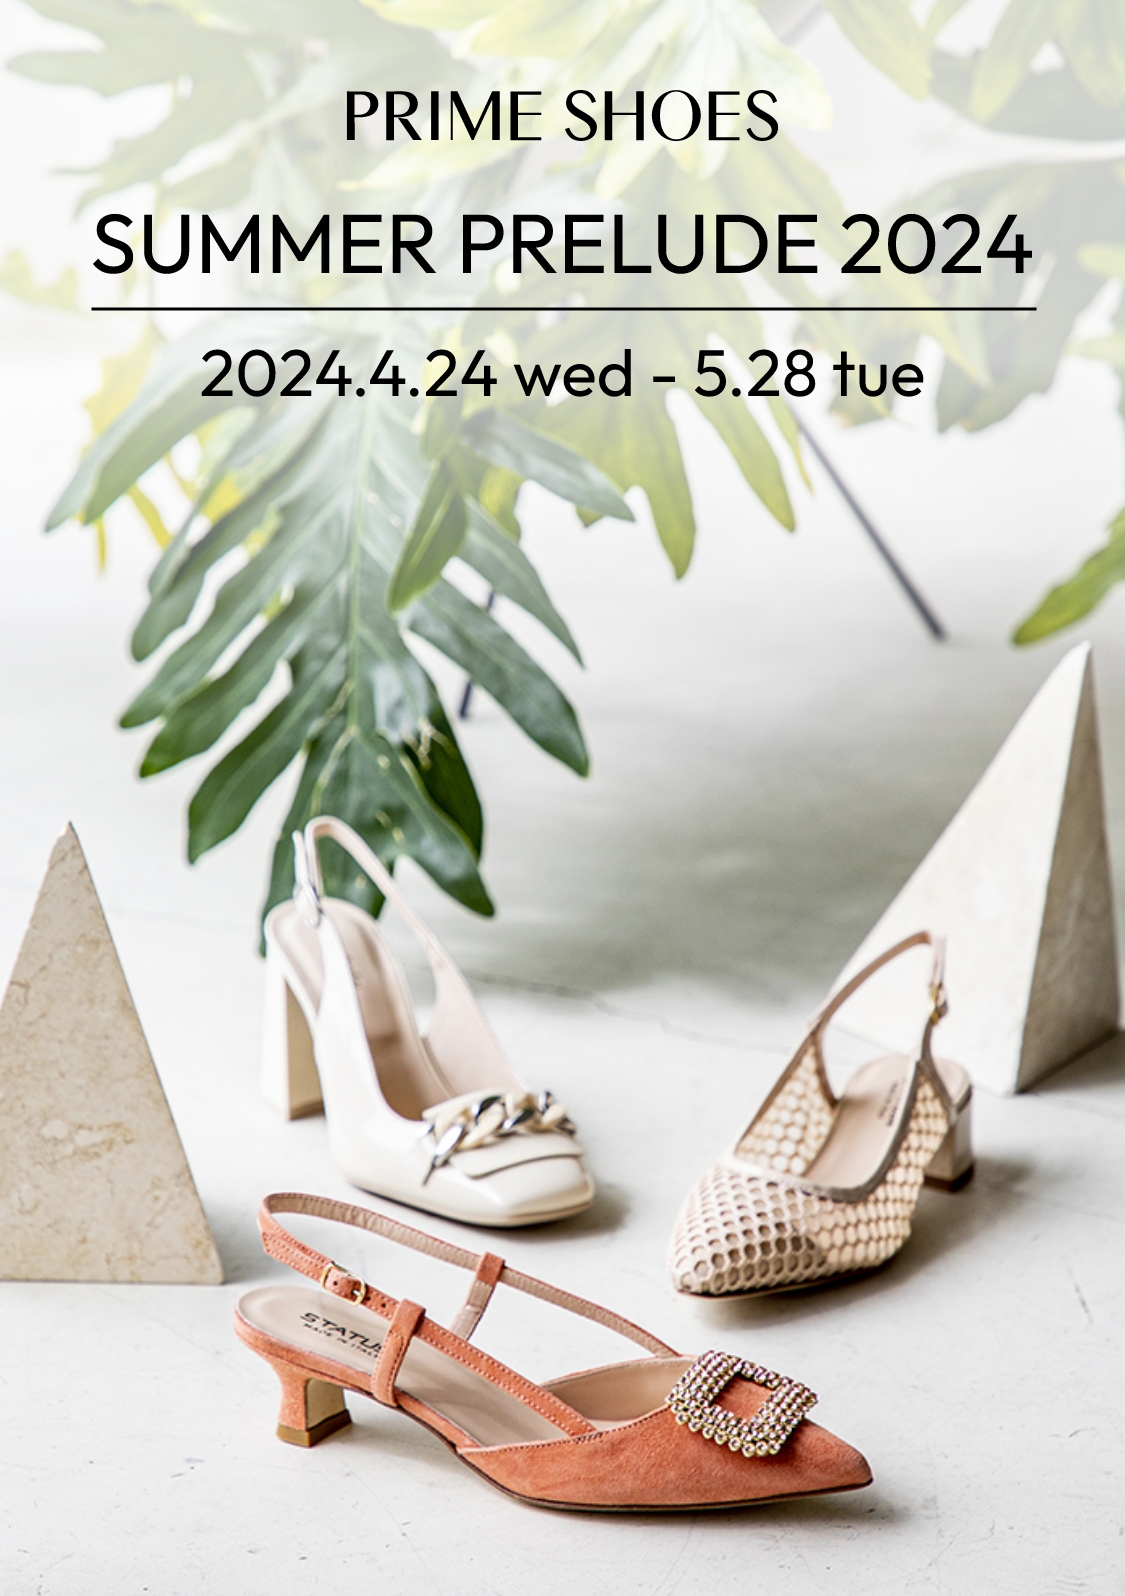 PRIME SHOES/SUMMER PRELUDE 2024